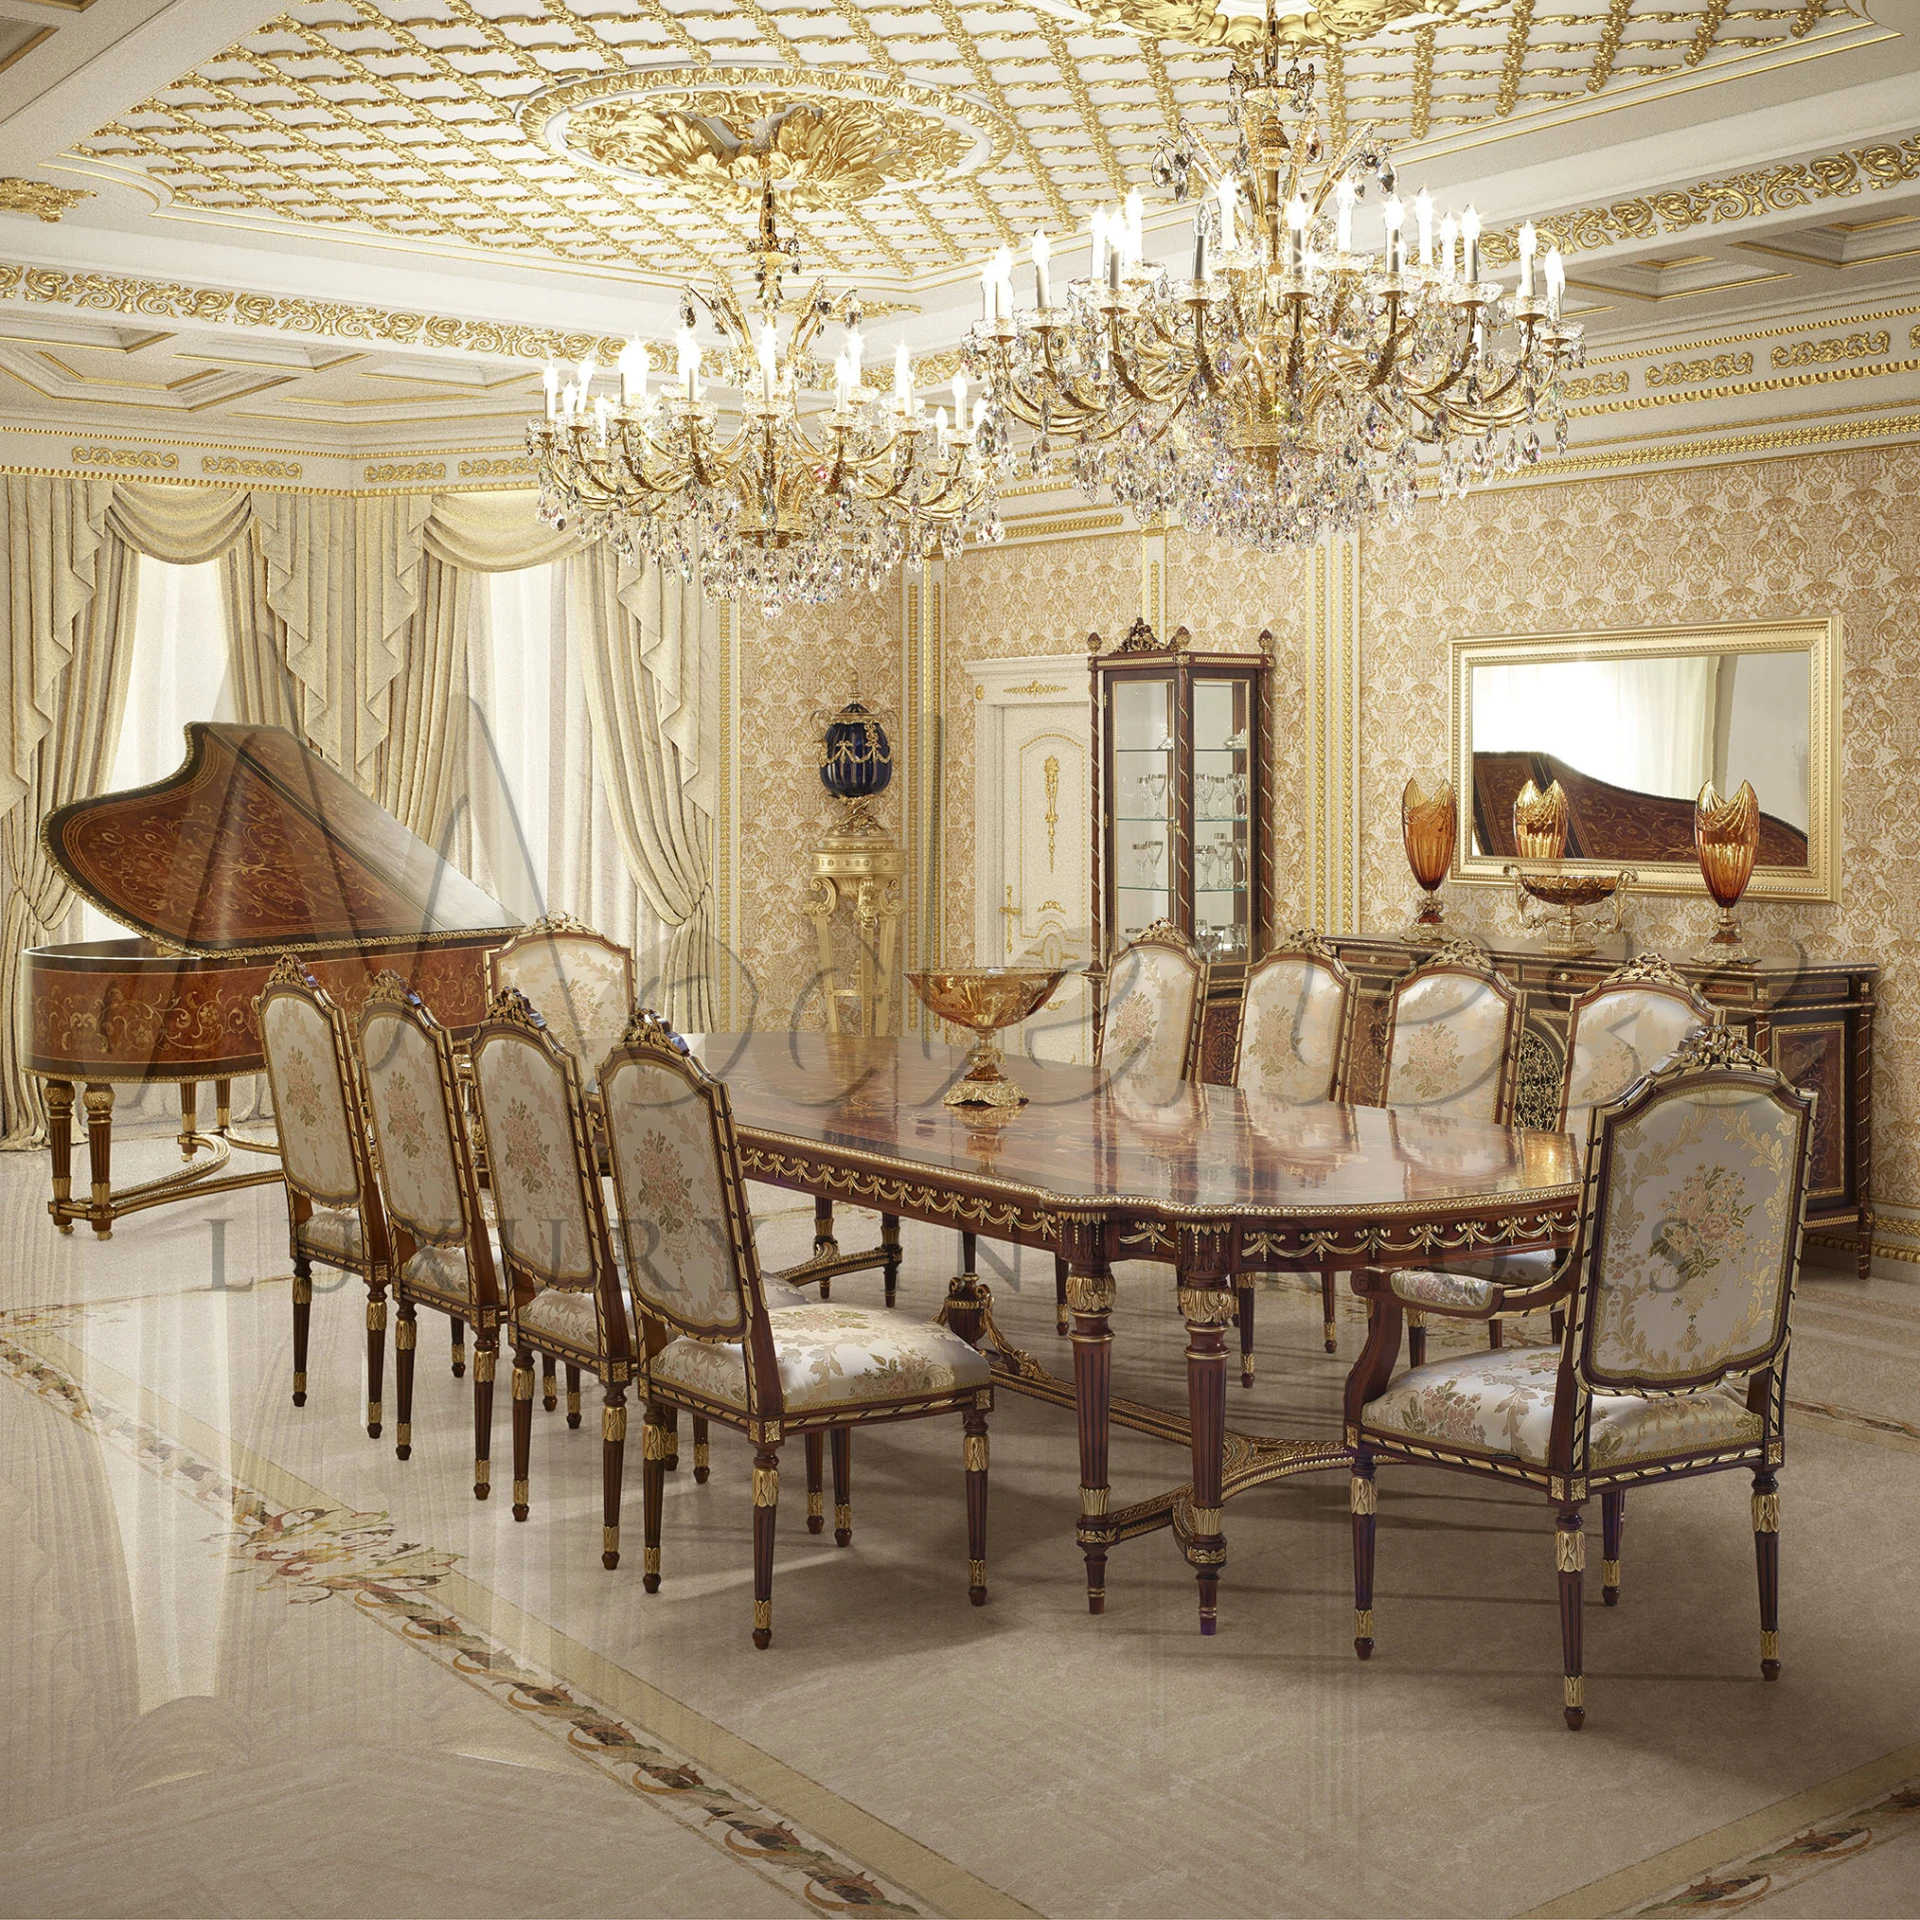 Seats 10 with intricate inlays and ornate golden motifs. Subtly grand, easily making a statement in any room setting.